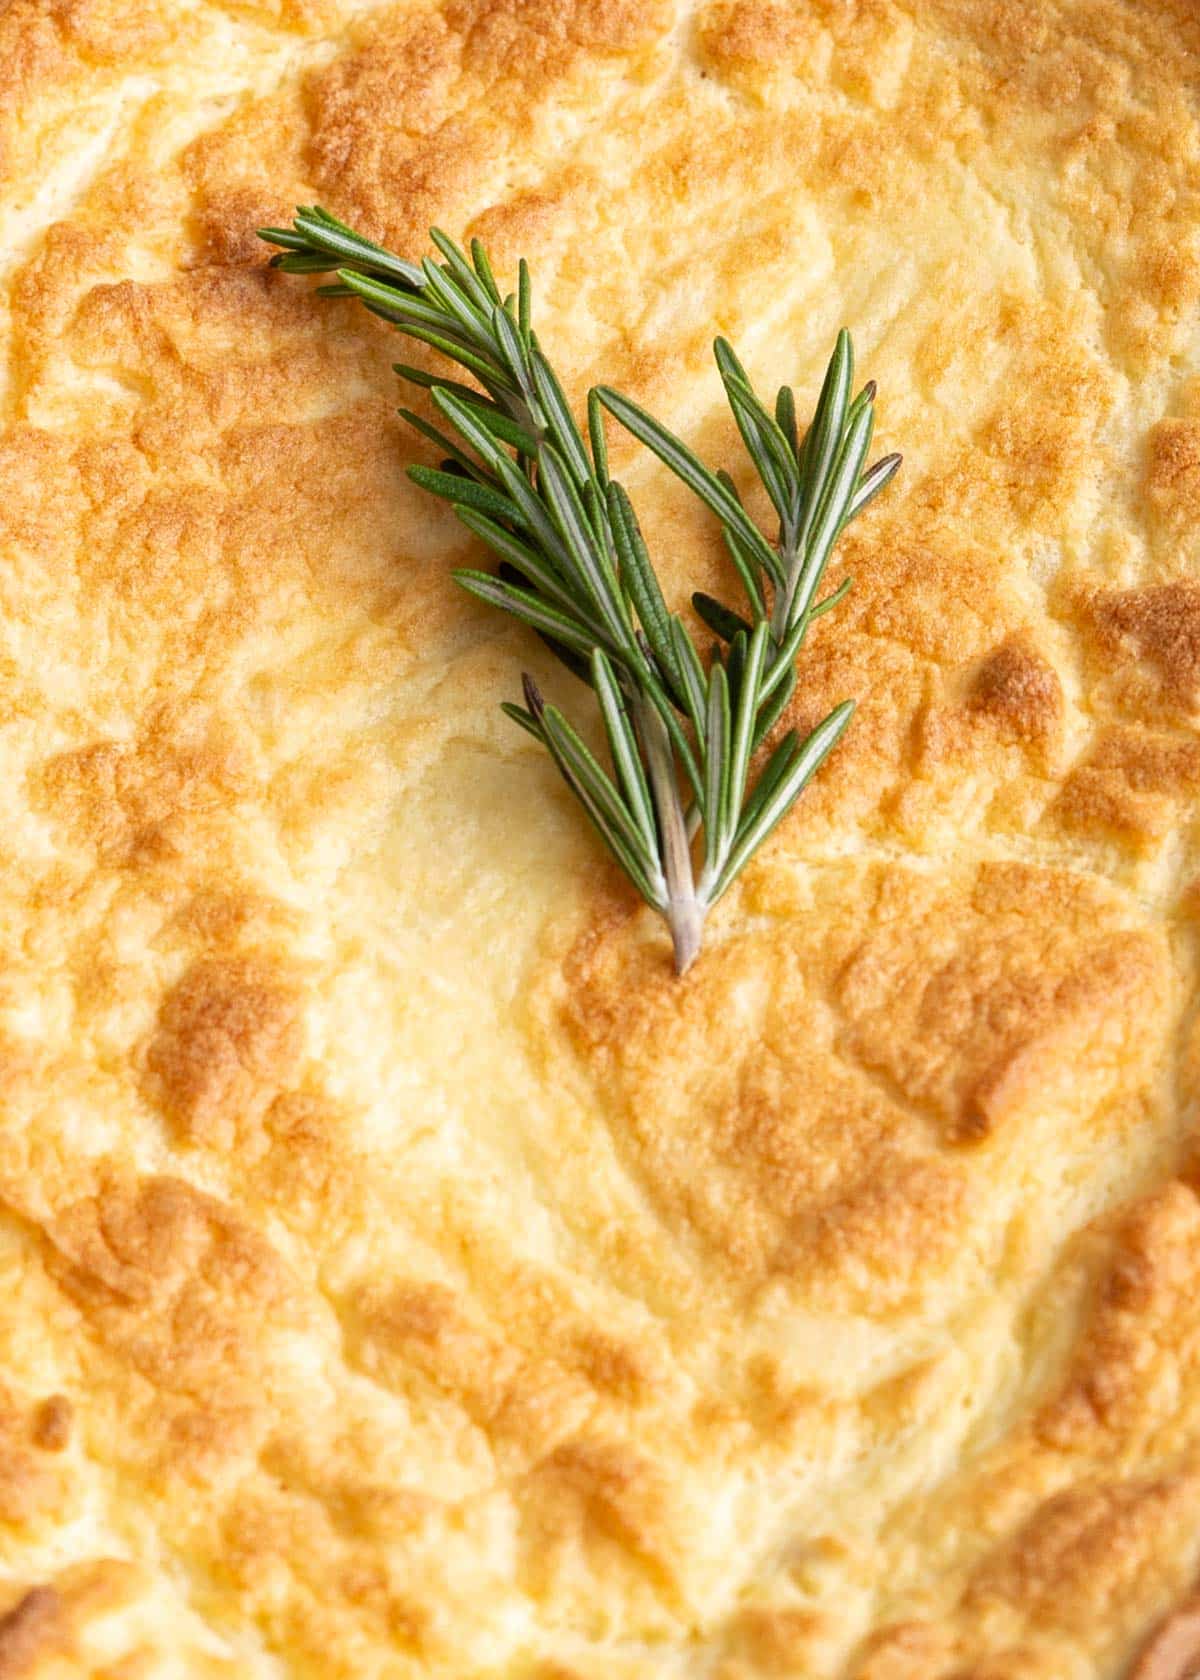 Top of potato souffle with fresh rosemary.